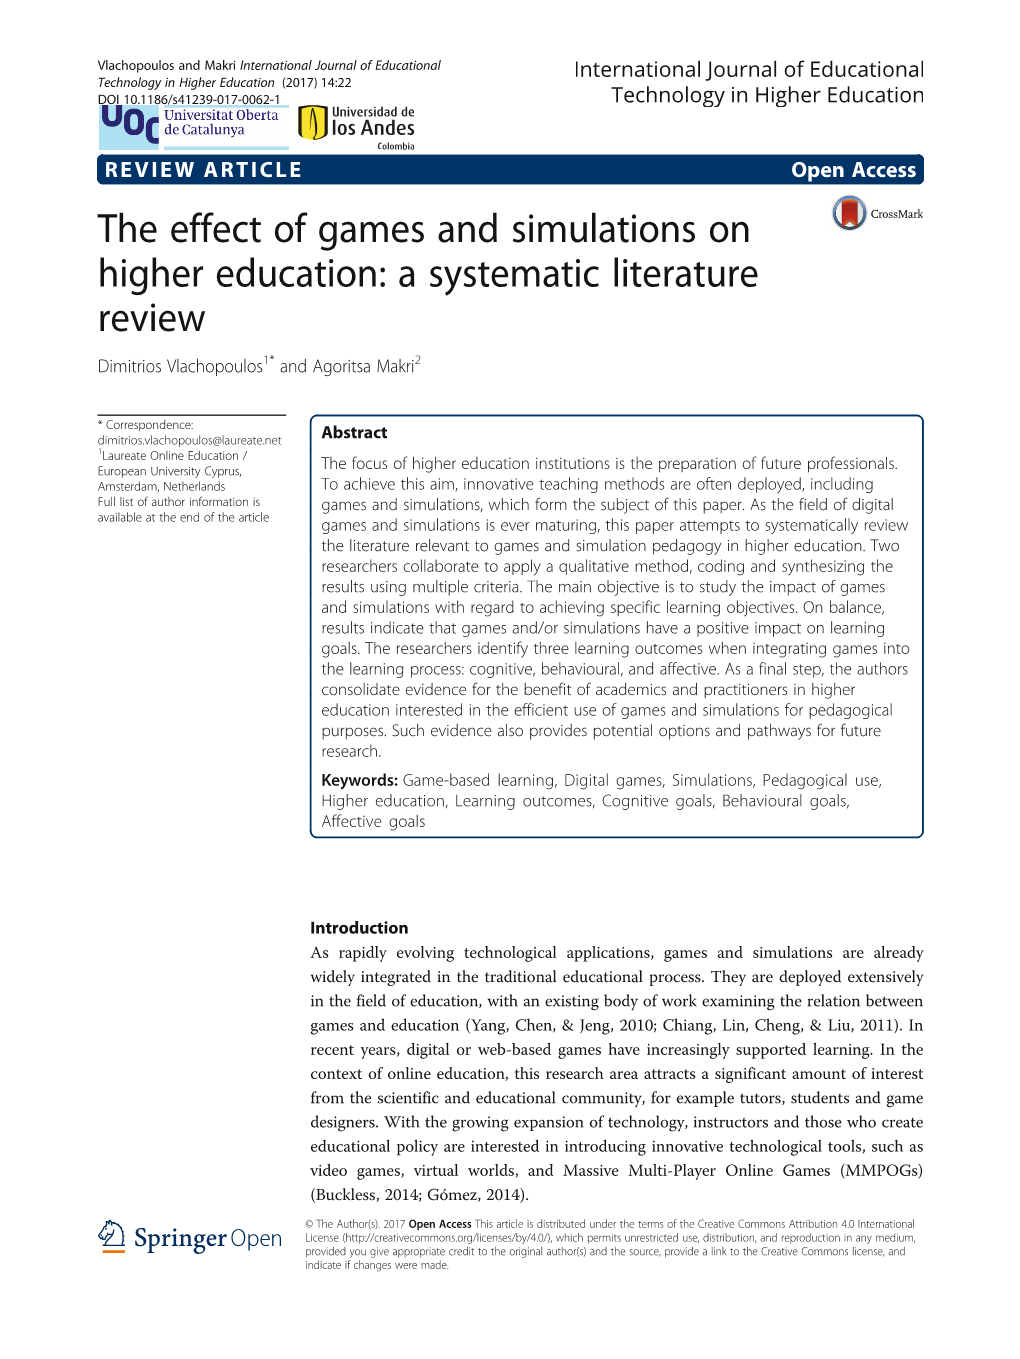 The Effect of Games and Simulations on Higher Education: a Systematic Literature Review Dimitrios Vlachopoulos1* and Agoritsa Makri2